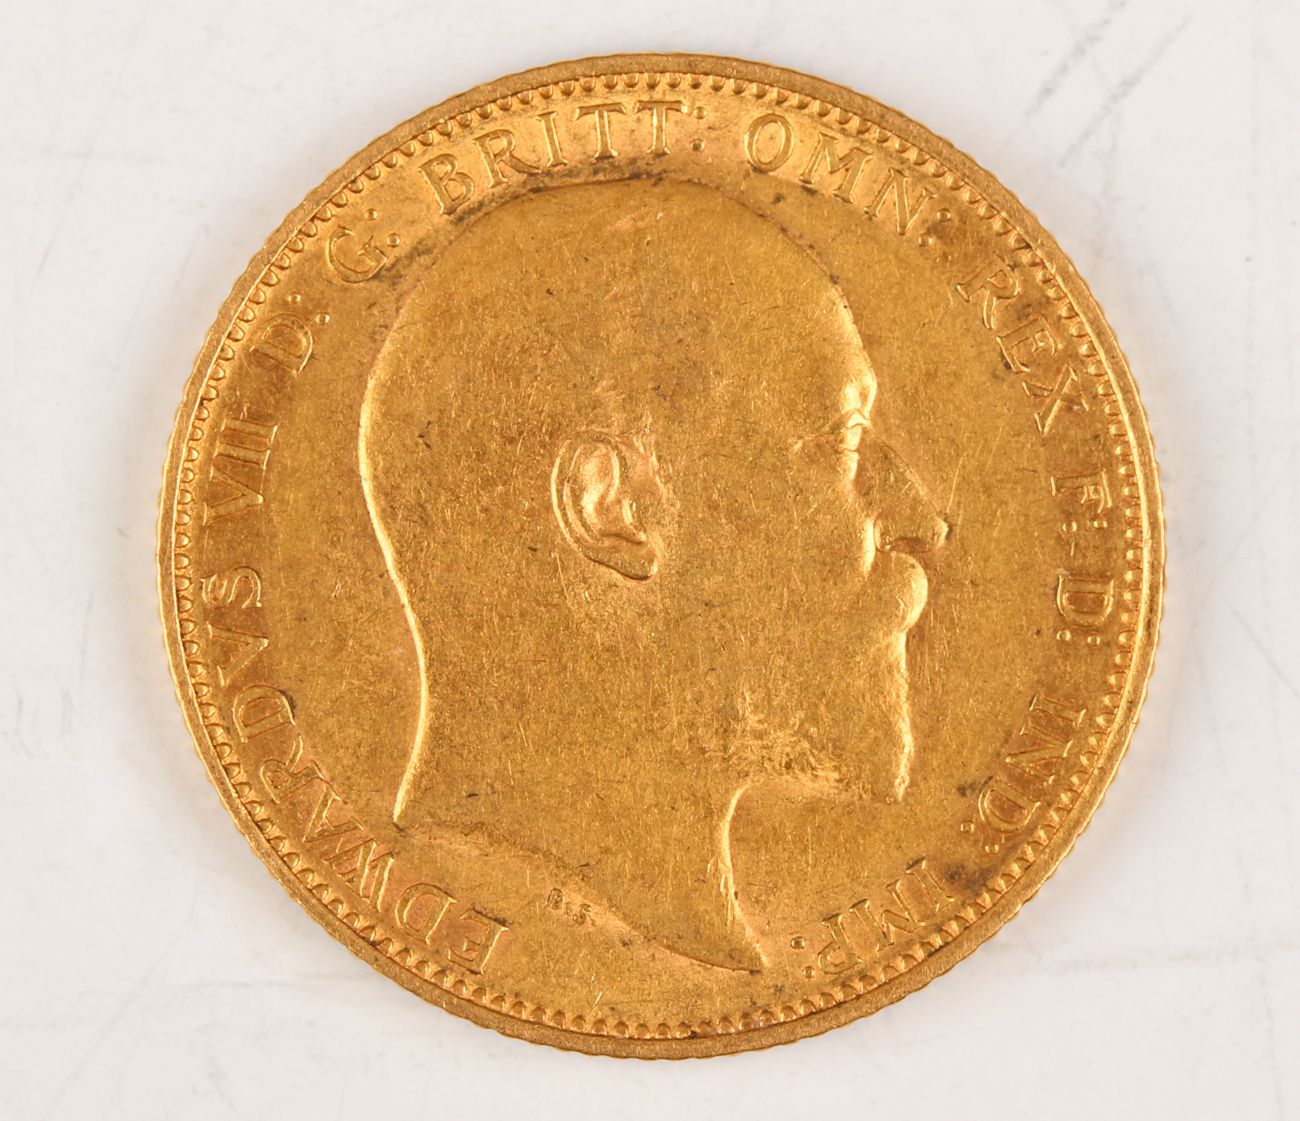 An Edward VII sovereign 1904.Buyer’s Premium 29.4% (including VAT @ 20%) of the hammer price. Lots